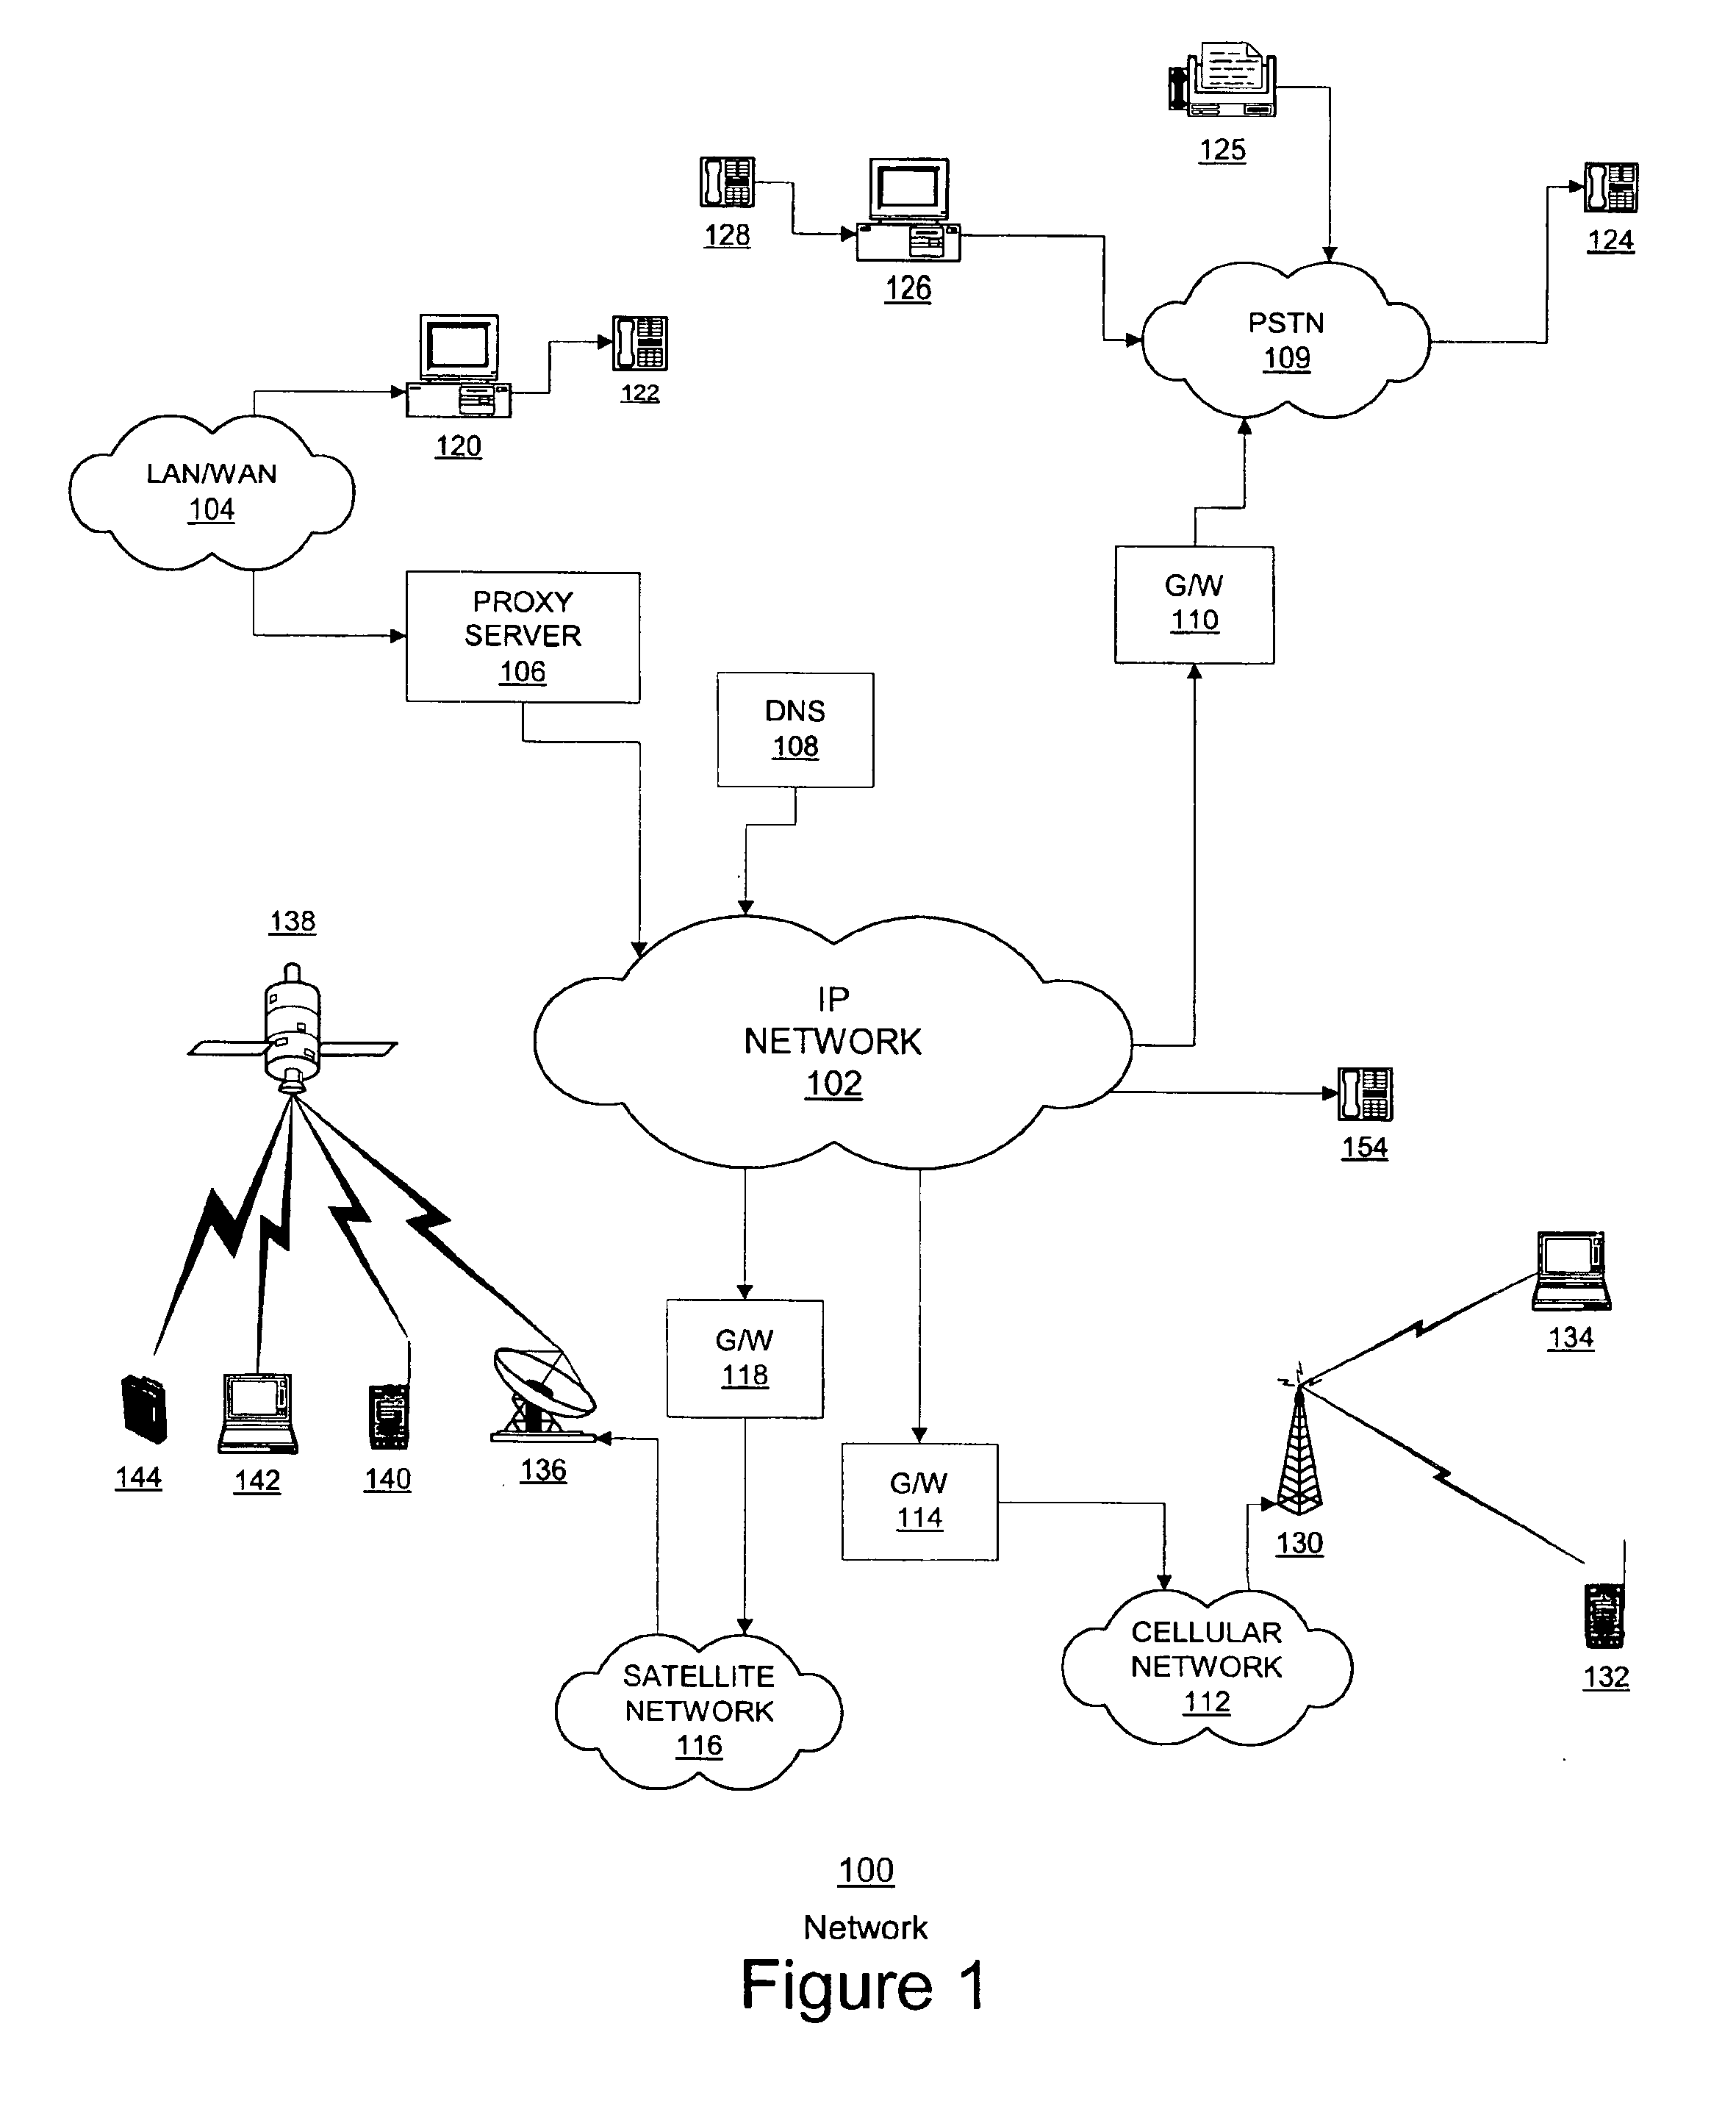 Method and an apparatus for detecting a need for security and invoking a secured presentation of data